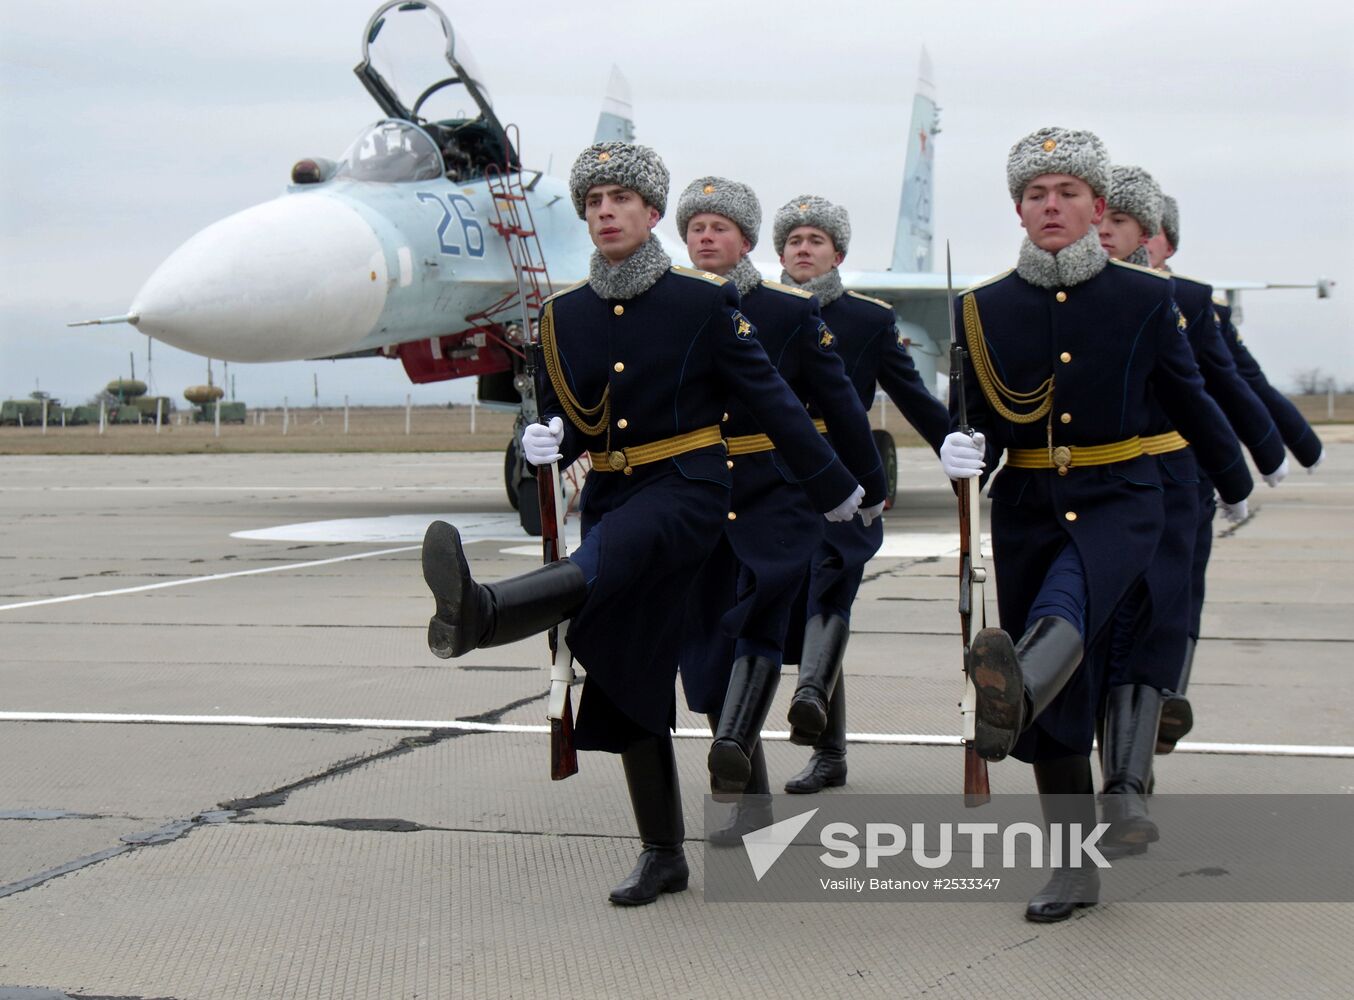 New equipment arrives at Belbek airfield in Crimea